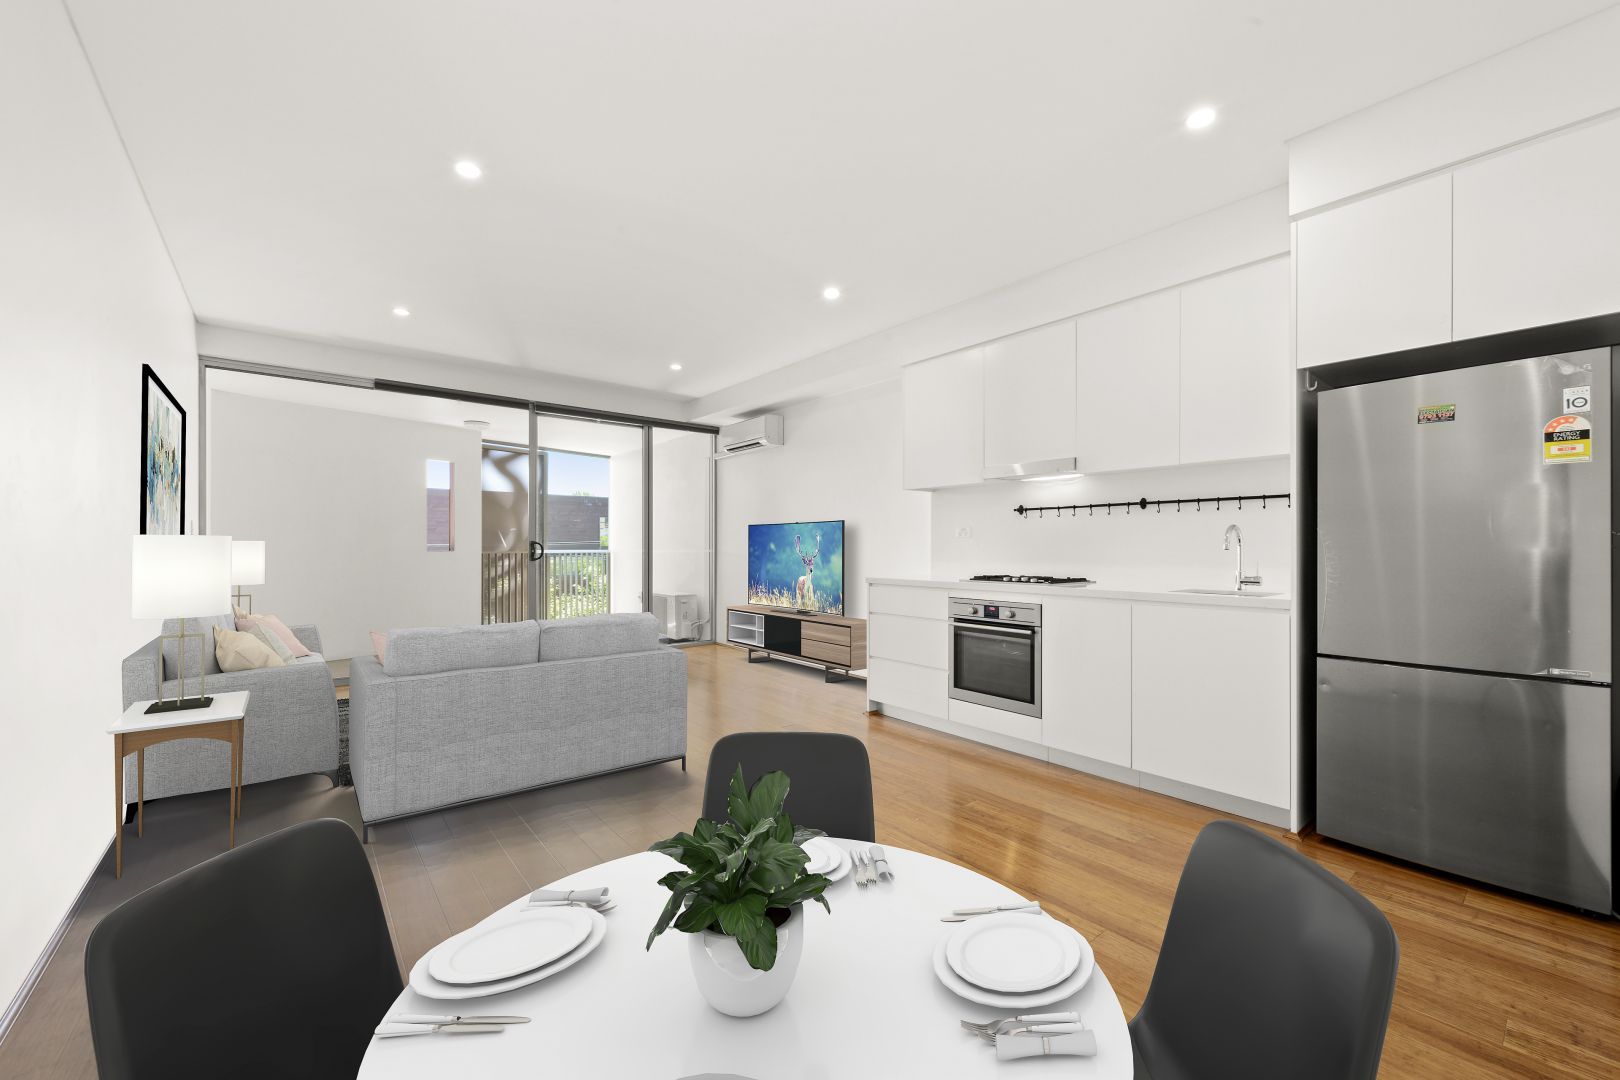 1 bedrooms Apartment / Unit / Flat in 207/791-795 Botany Road ROSEBERY NSW, 2018